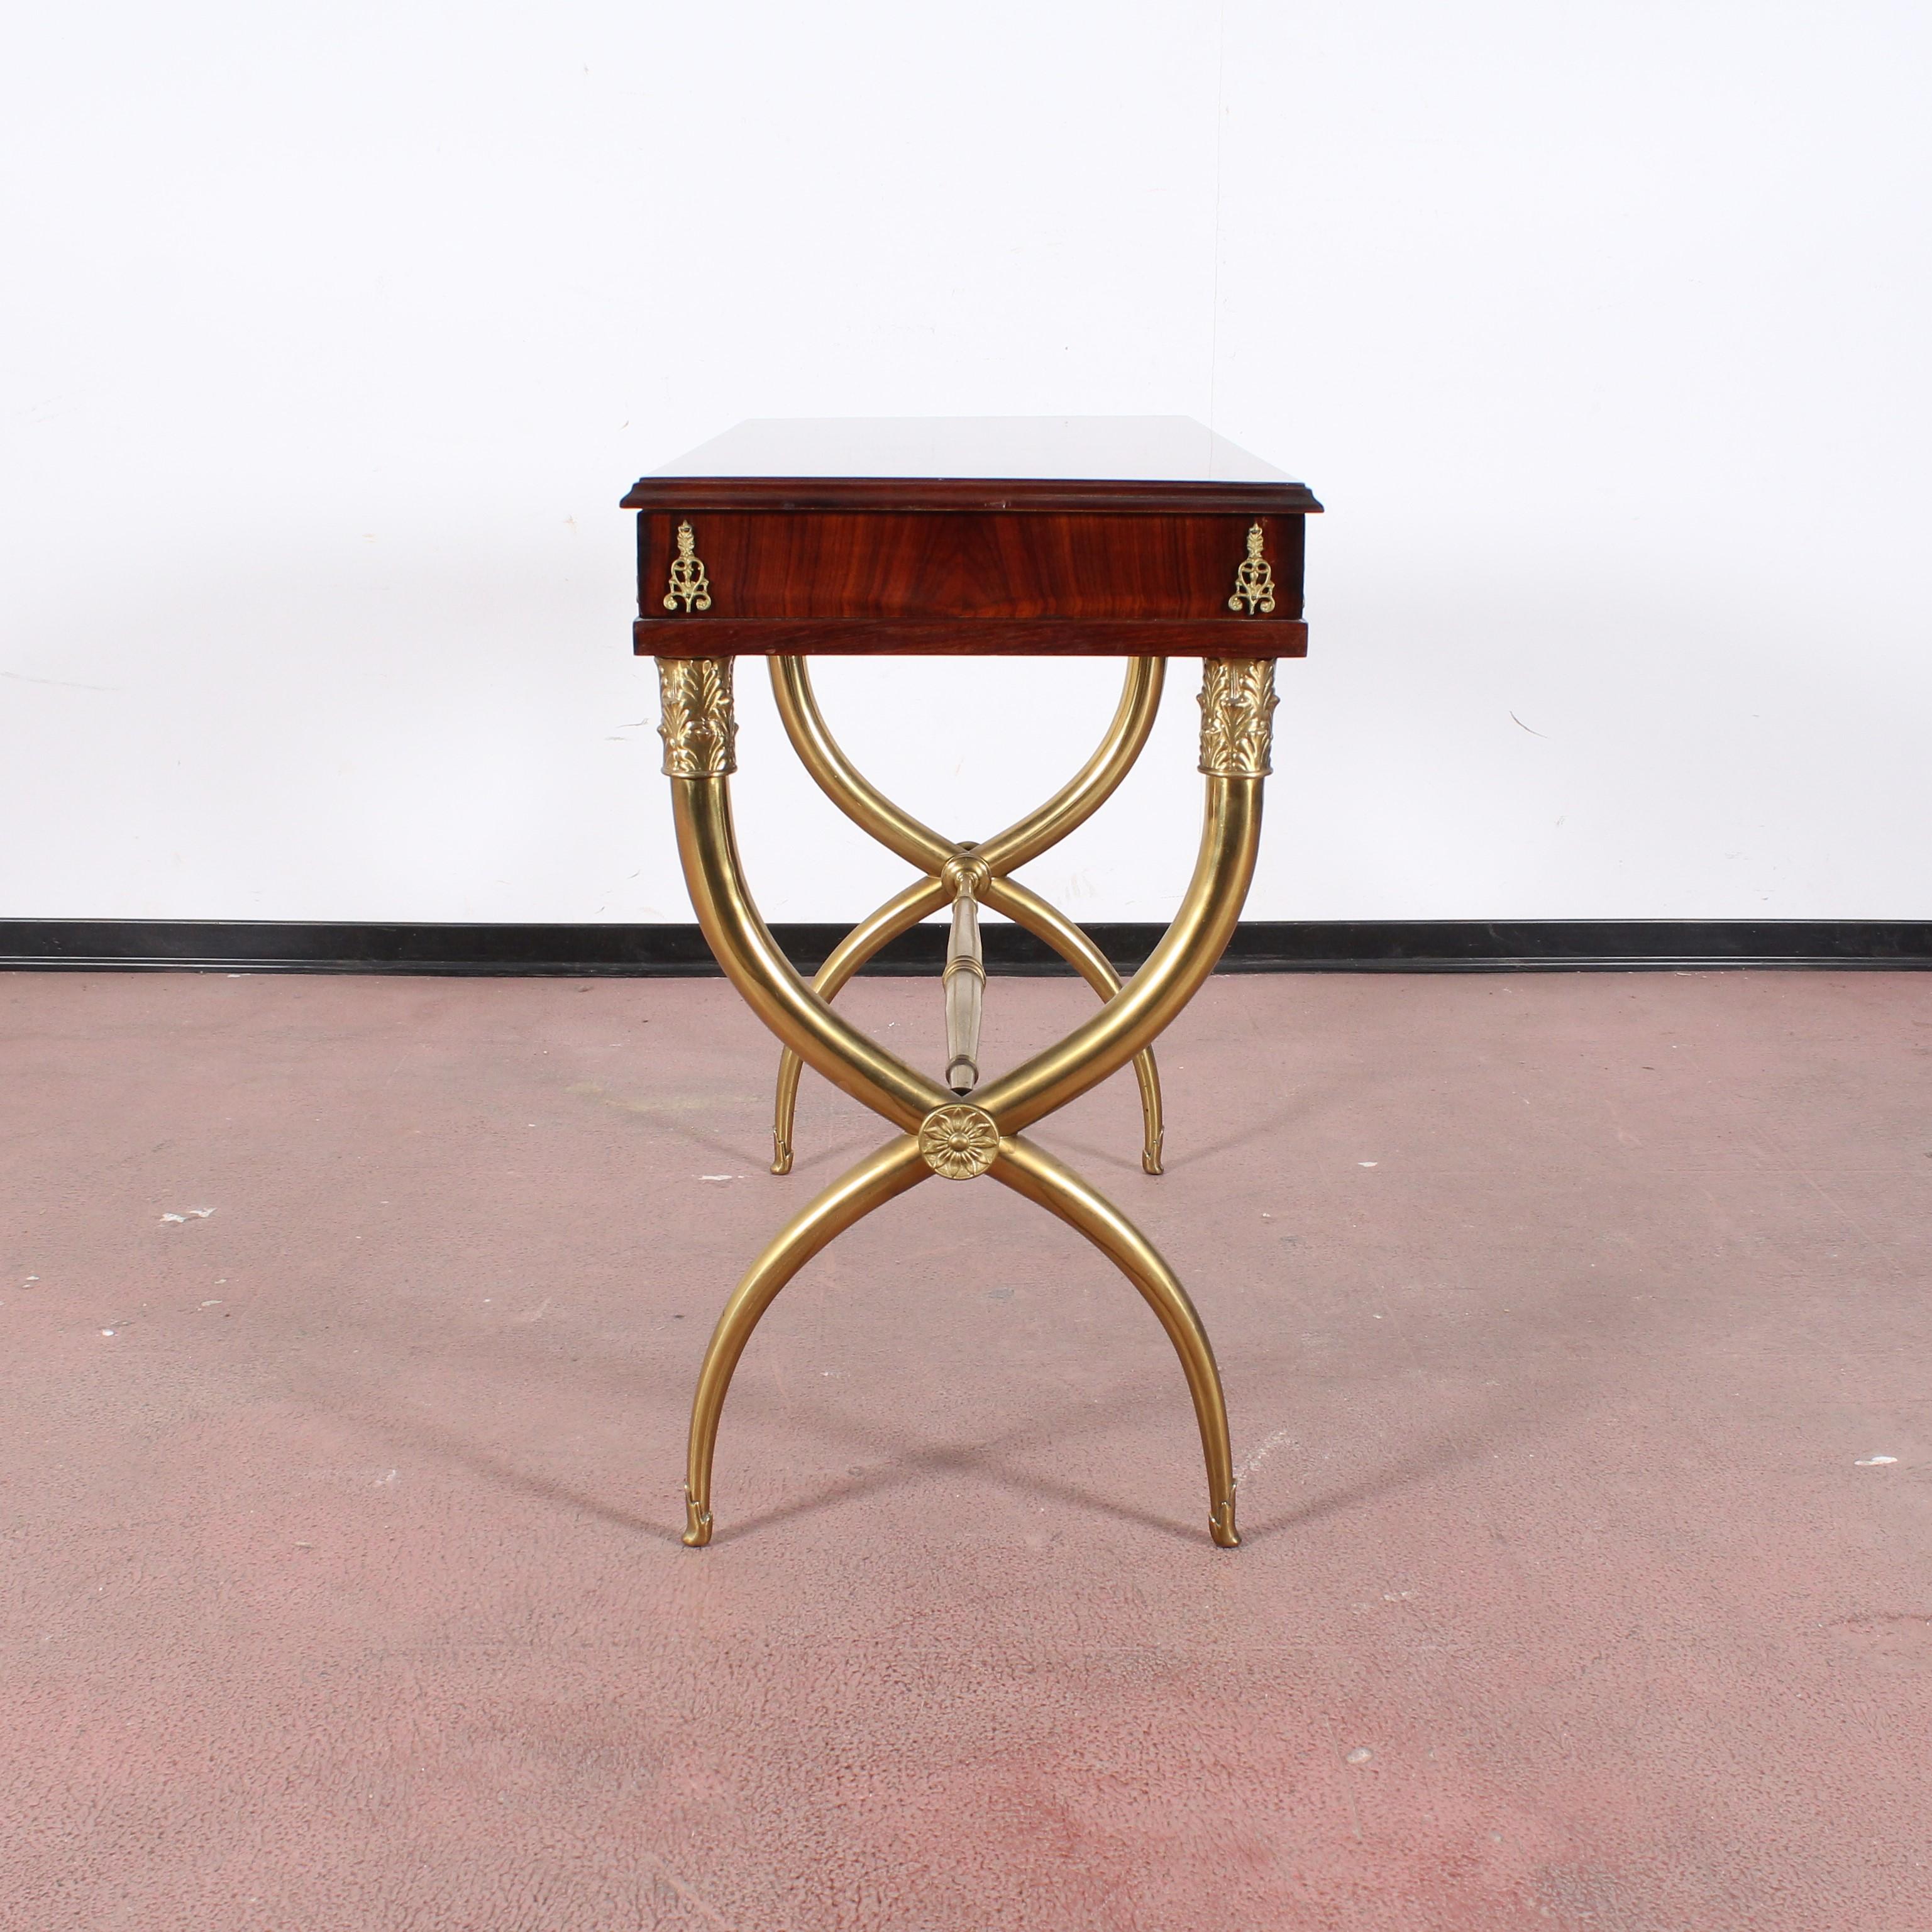 Italian Midcentury Gio Ponti Wood and Brass Console Table with Top Container 1950s Italy